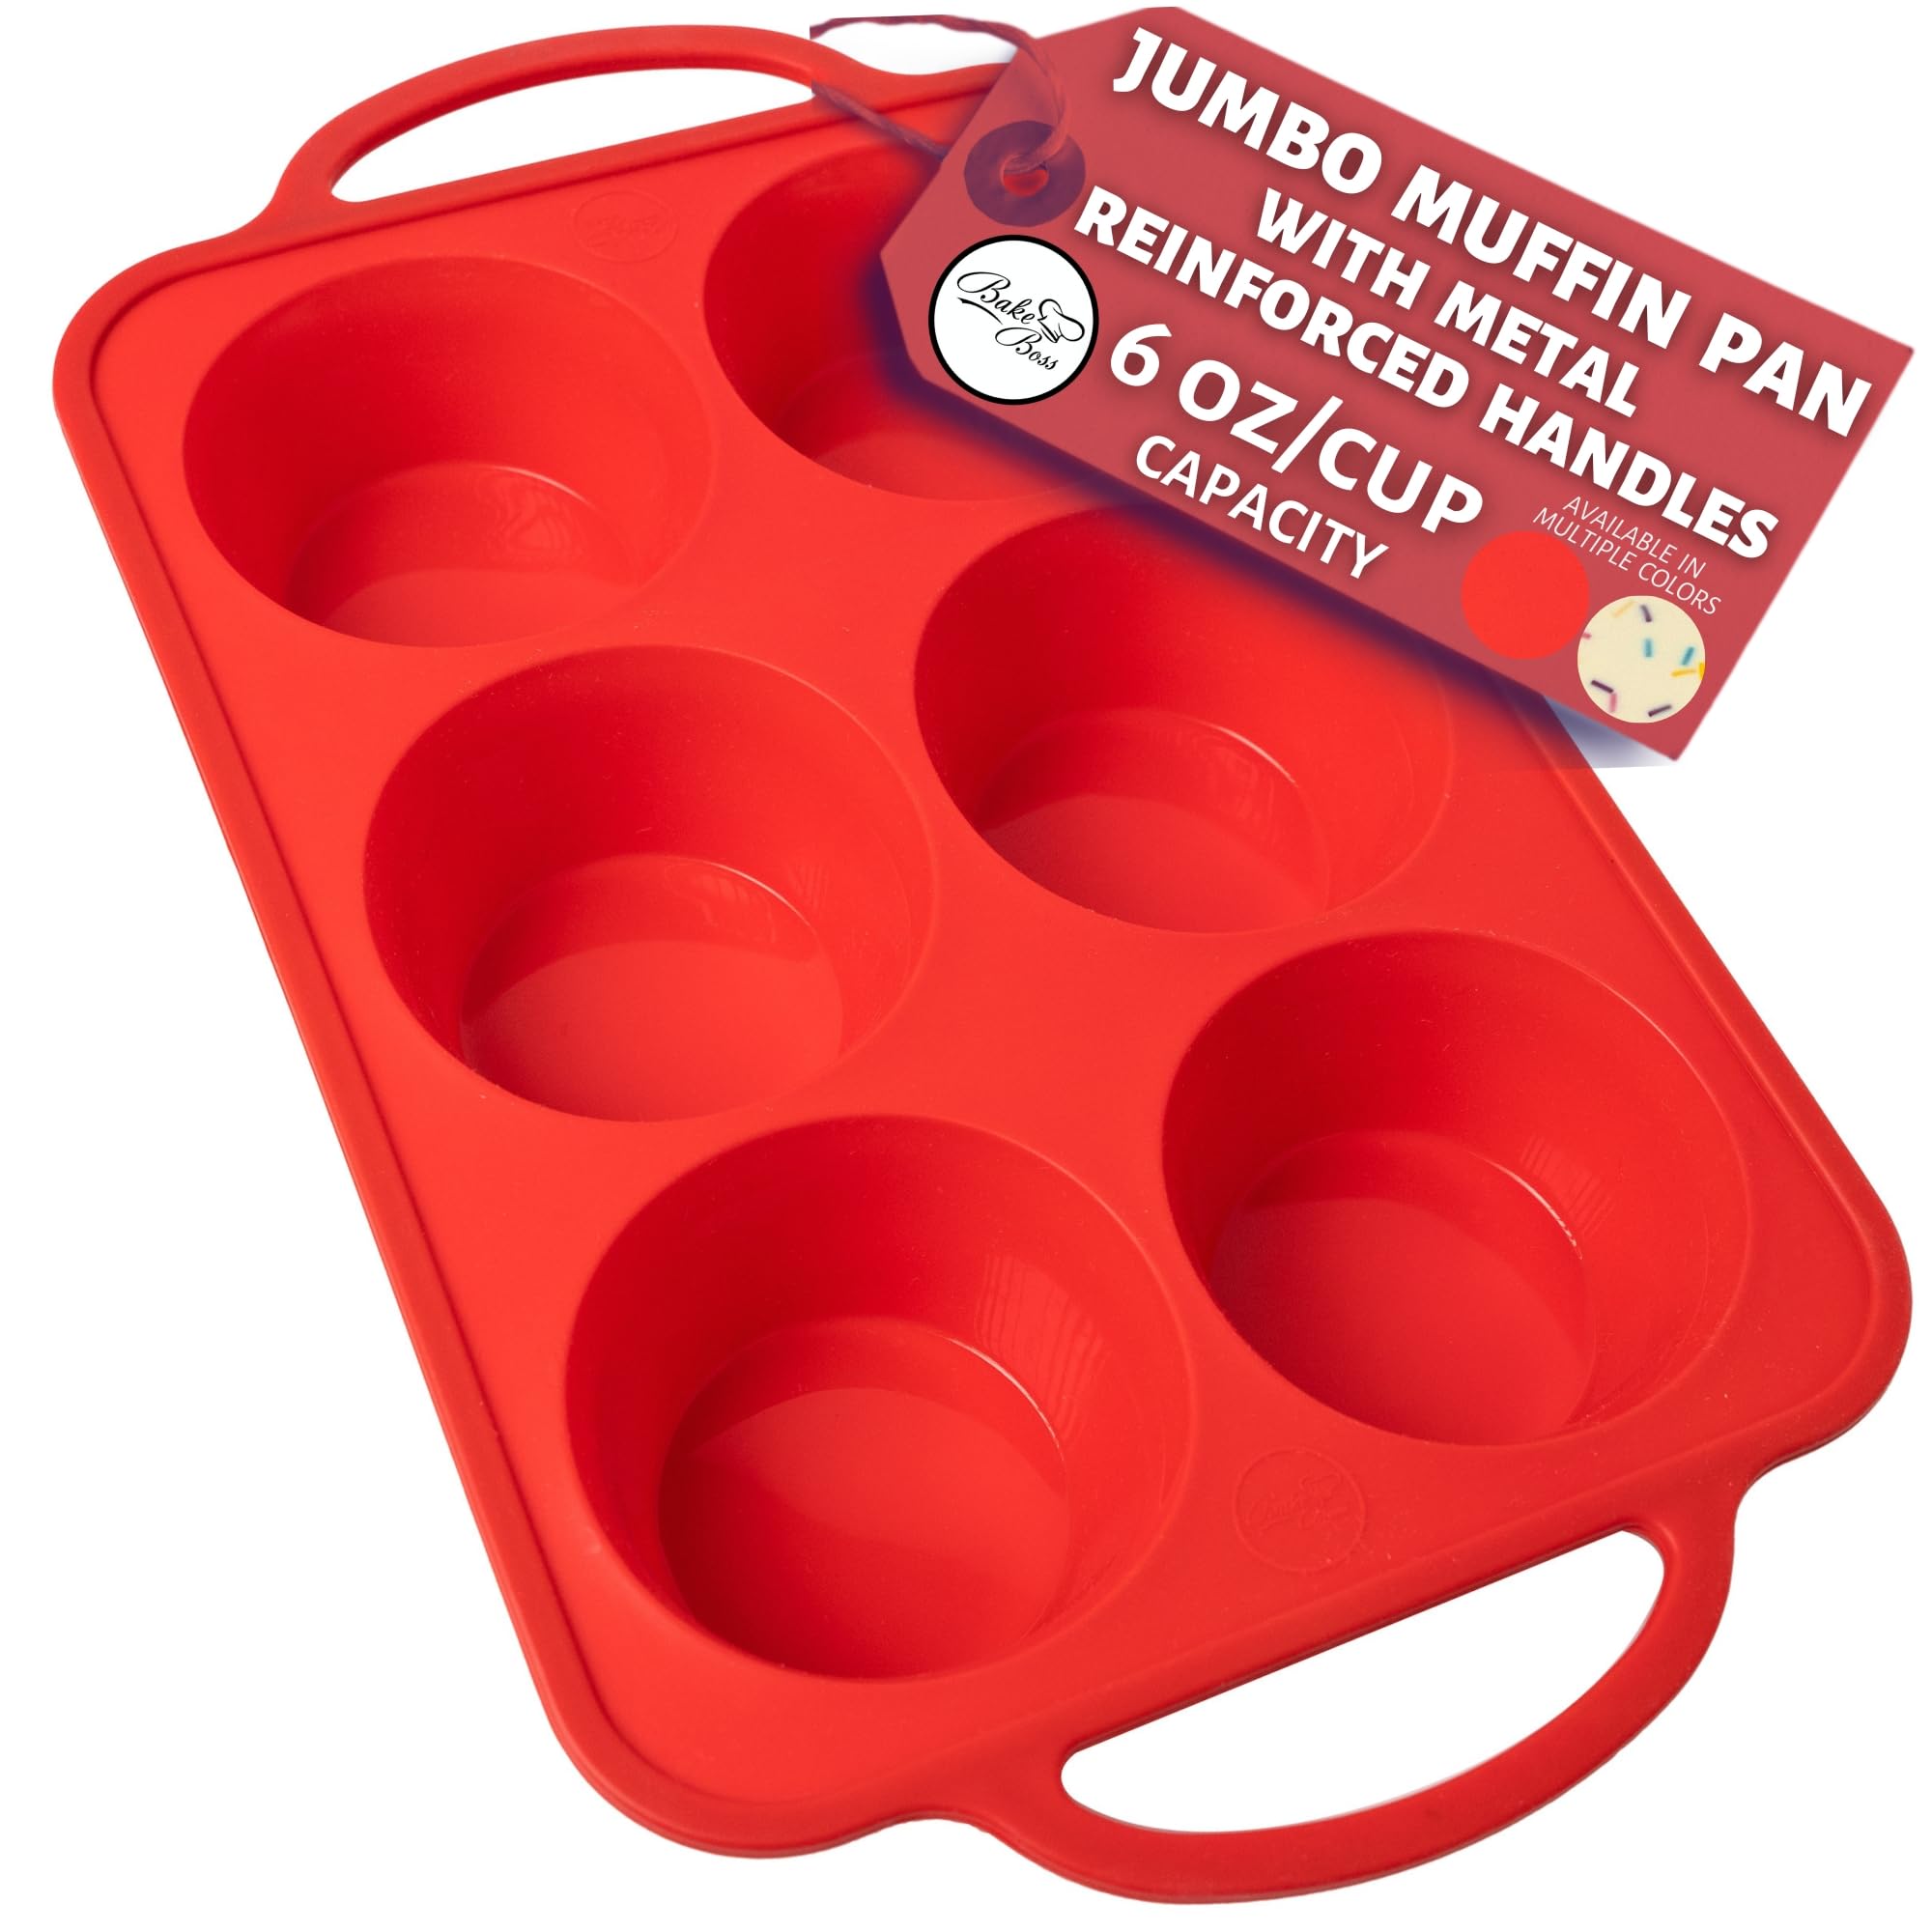 Extra Large Muffin Pan (6 Cups) - Red